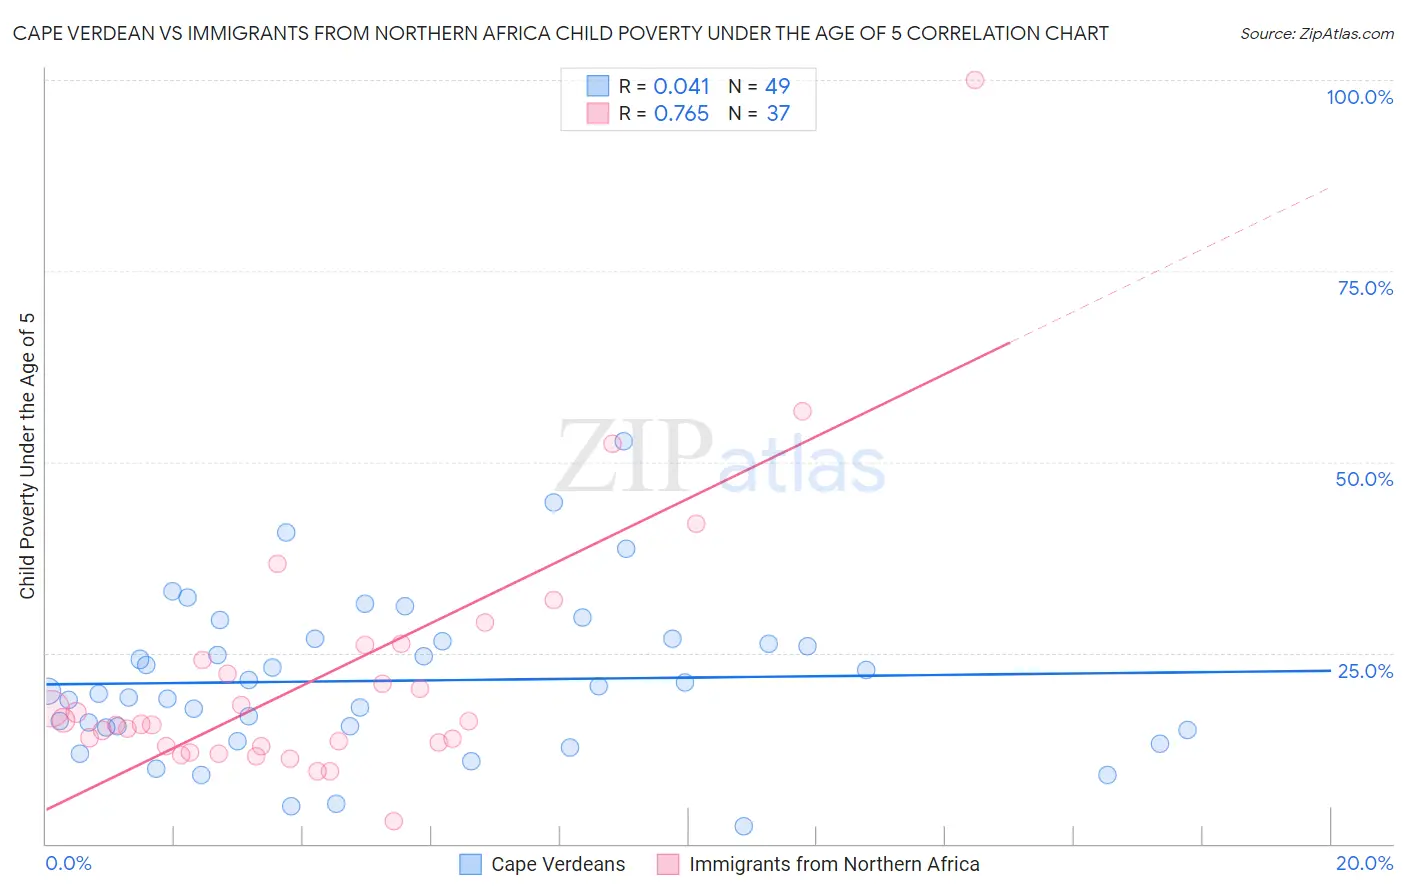 Cape Verdean vs Immigrants from Northern Africa Child Poverty Under the Age of 5